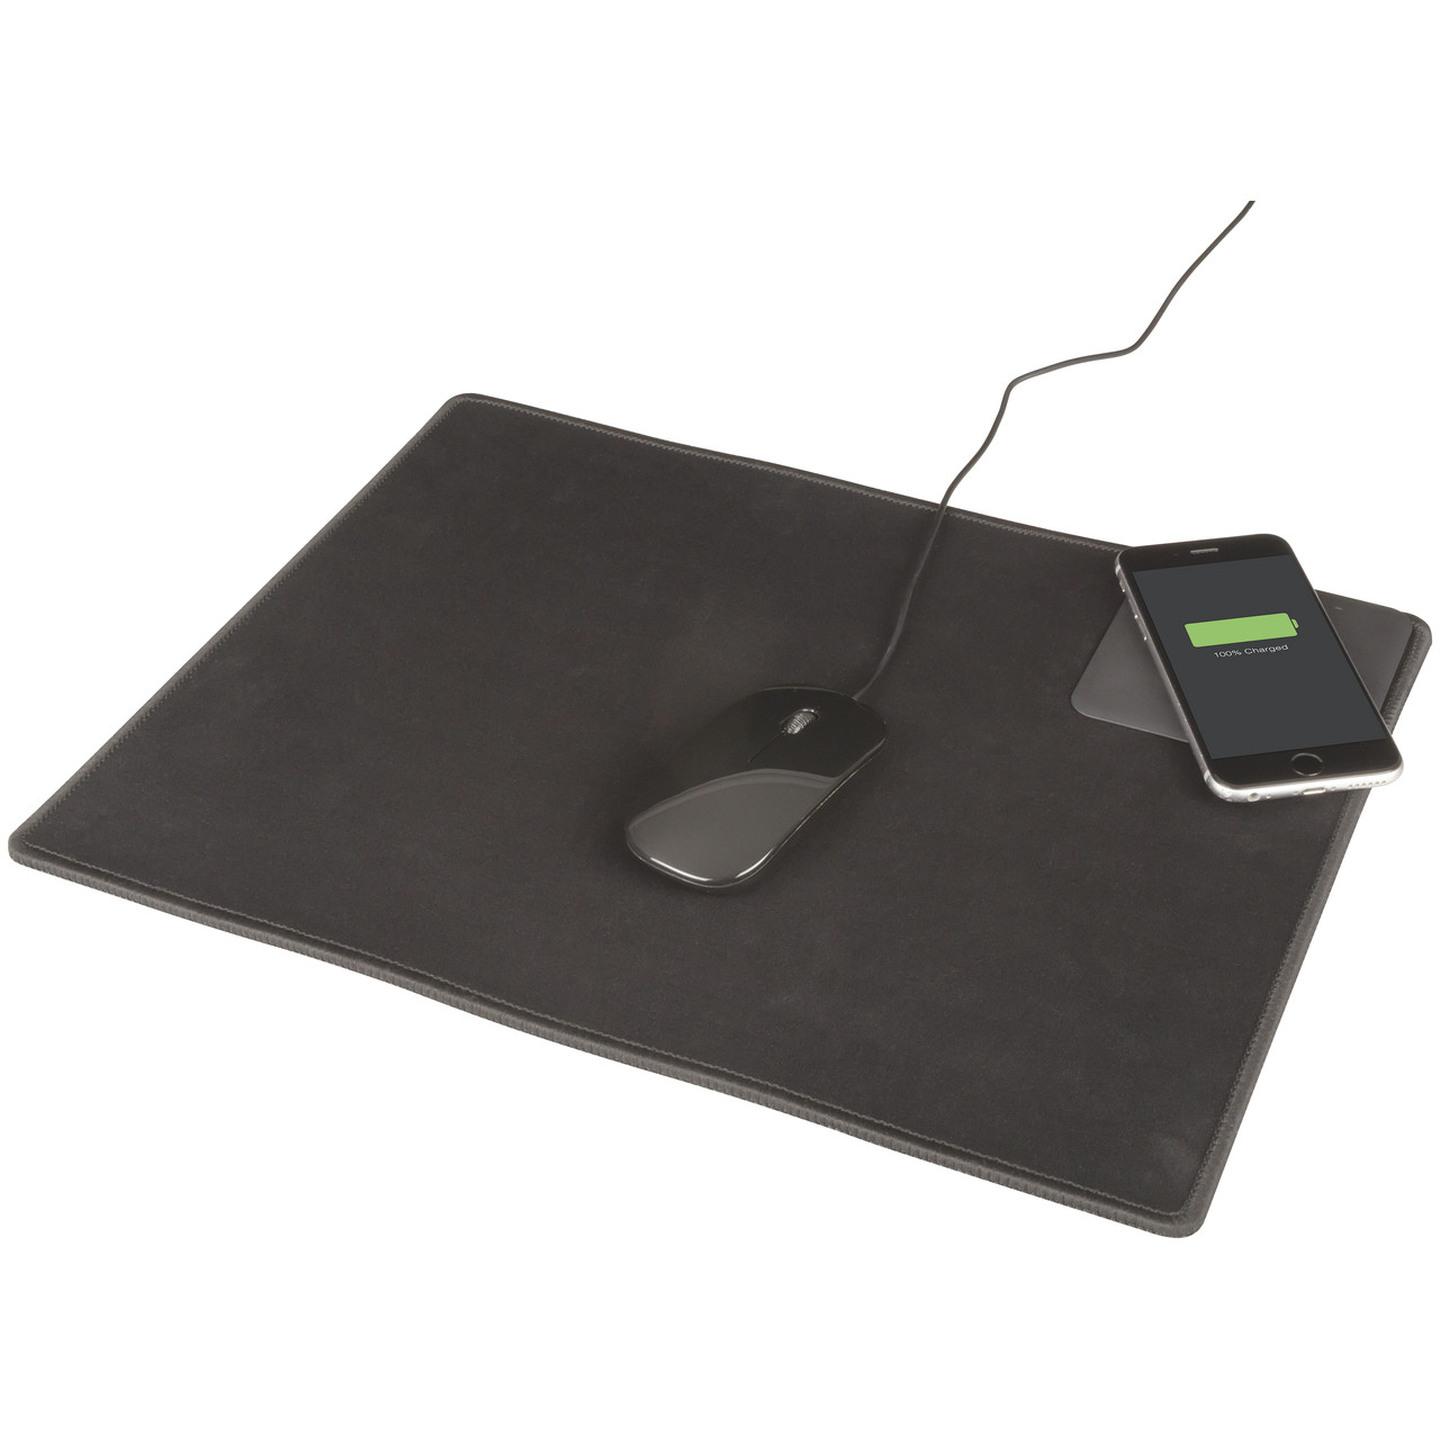 Mouse Pad with Wireless QI Charger